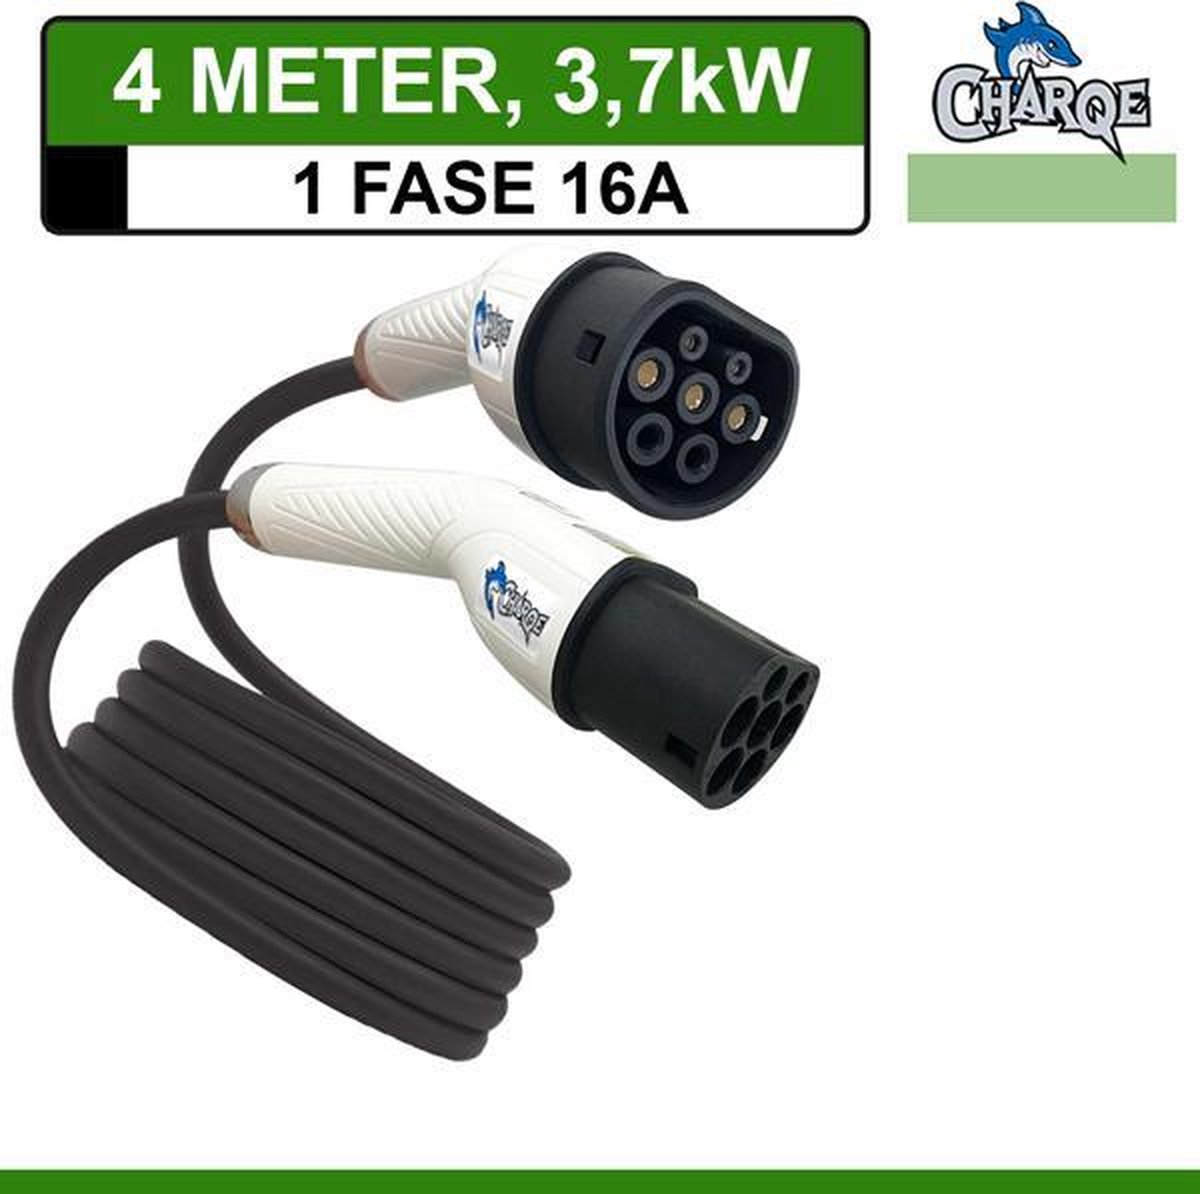 Charqe Premium Laadkabel - 4m - 3.7kW - 1 fase - 16A